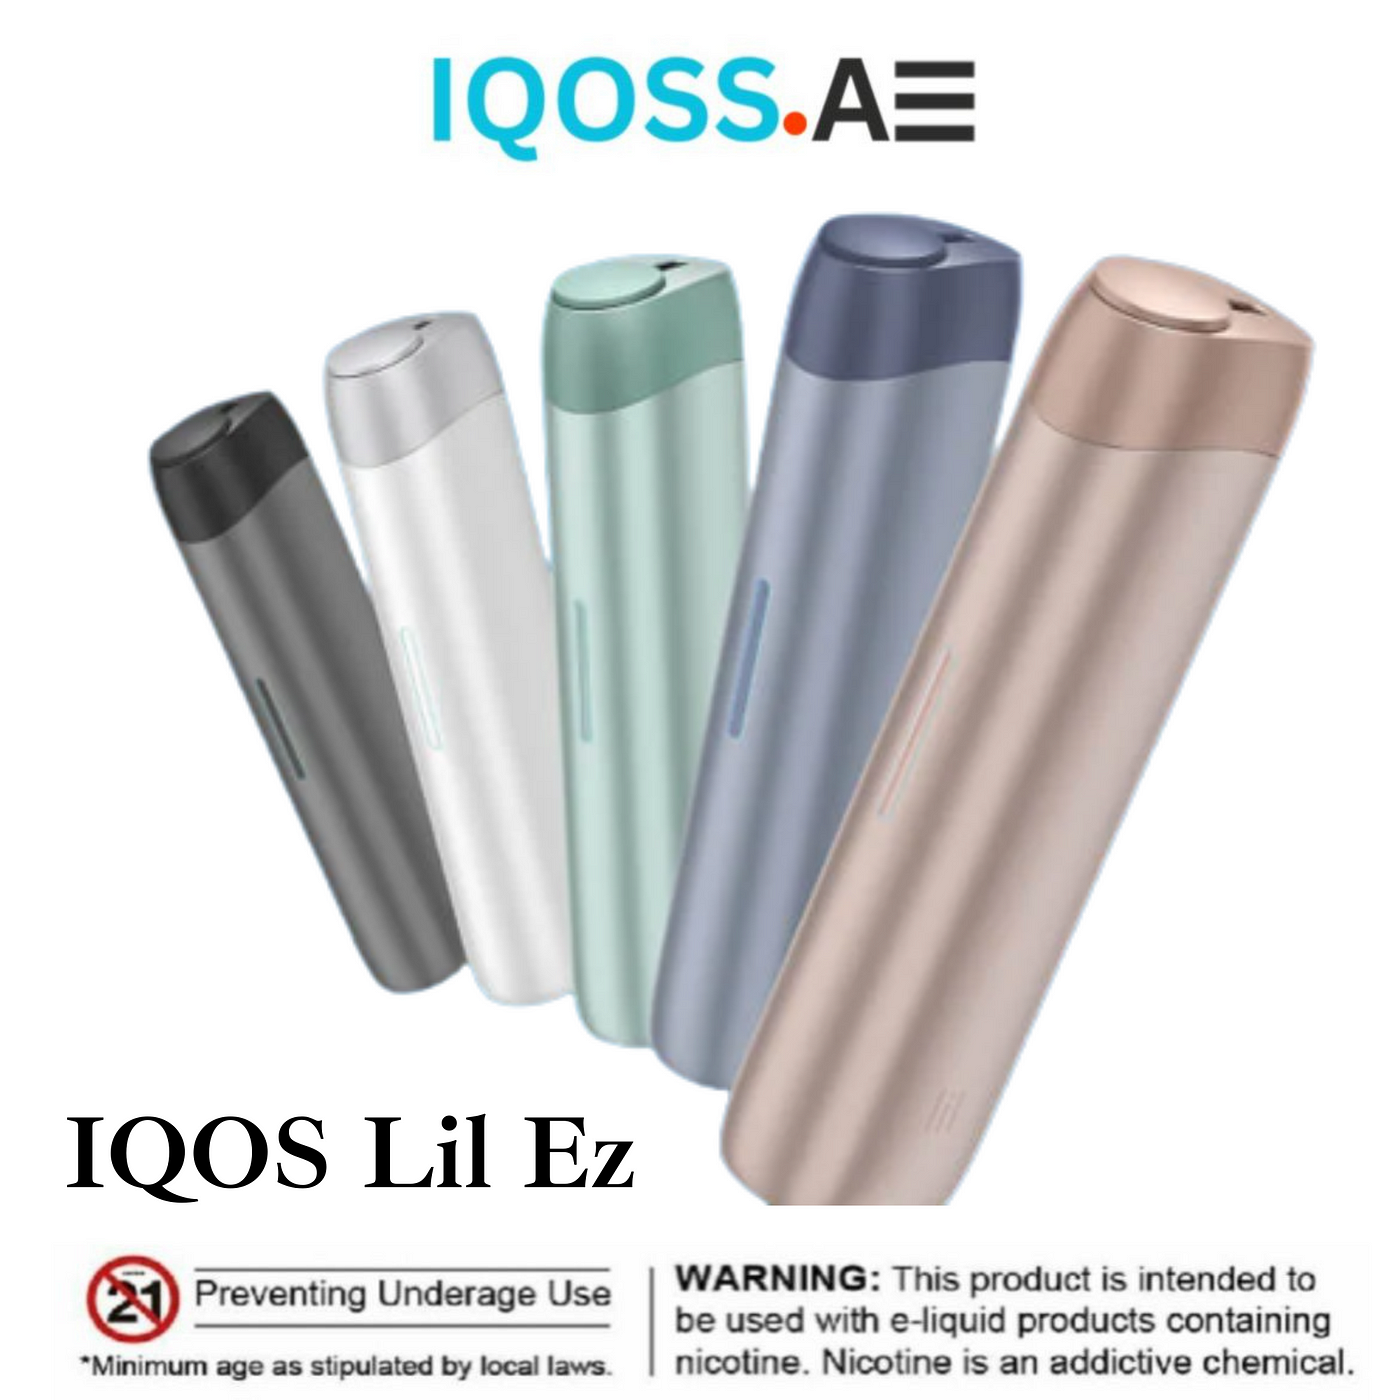 IQOS Launches Two New Devices in Dubai: The IQOS Lil Ez and the